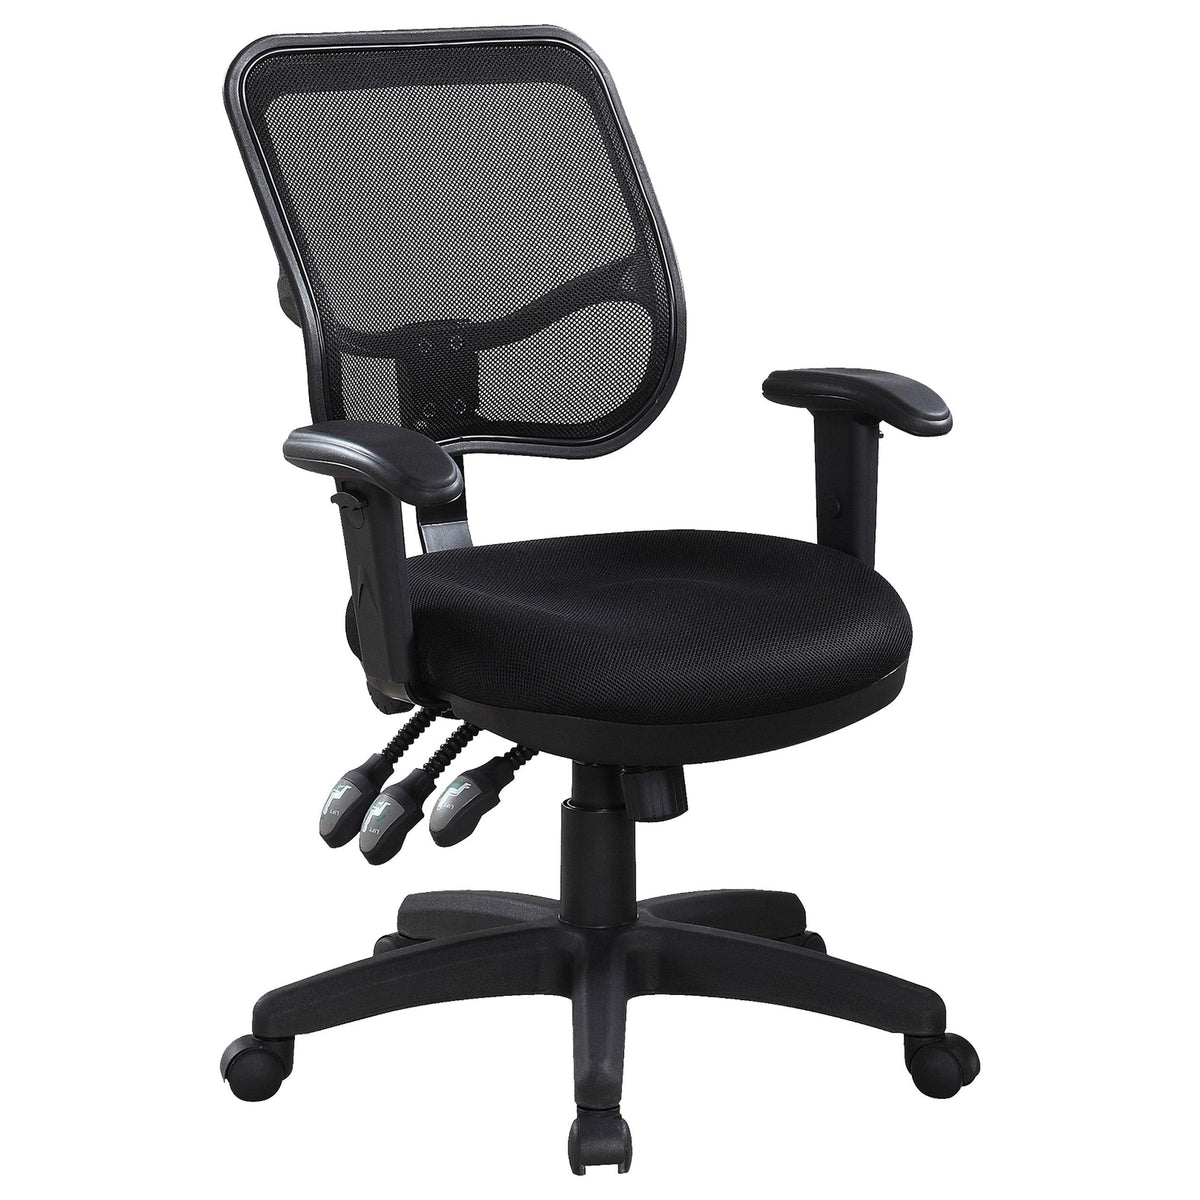 Rollo Adjustable Height Office Chair Black Rollo Adjustable Height Office Chair Black Half Price Furniture